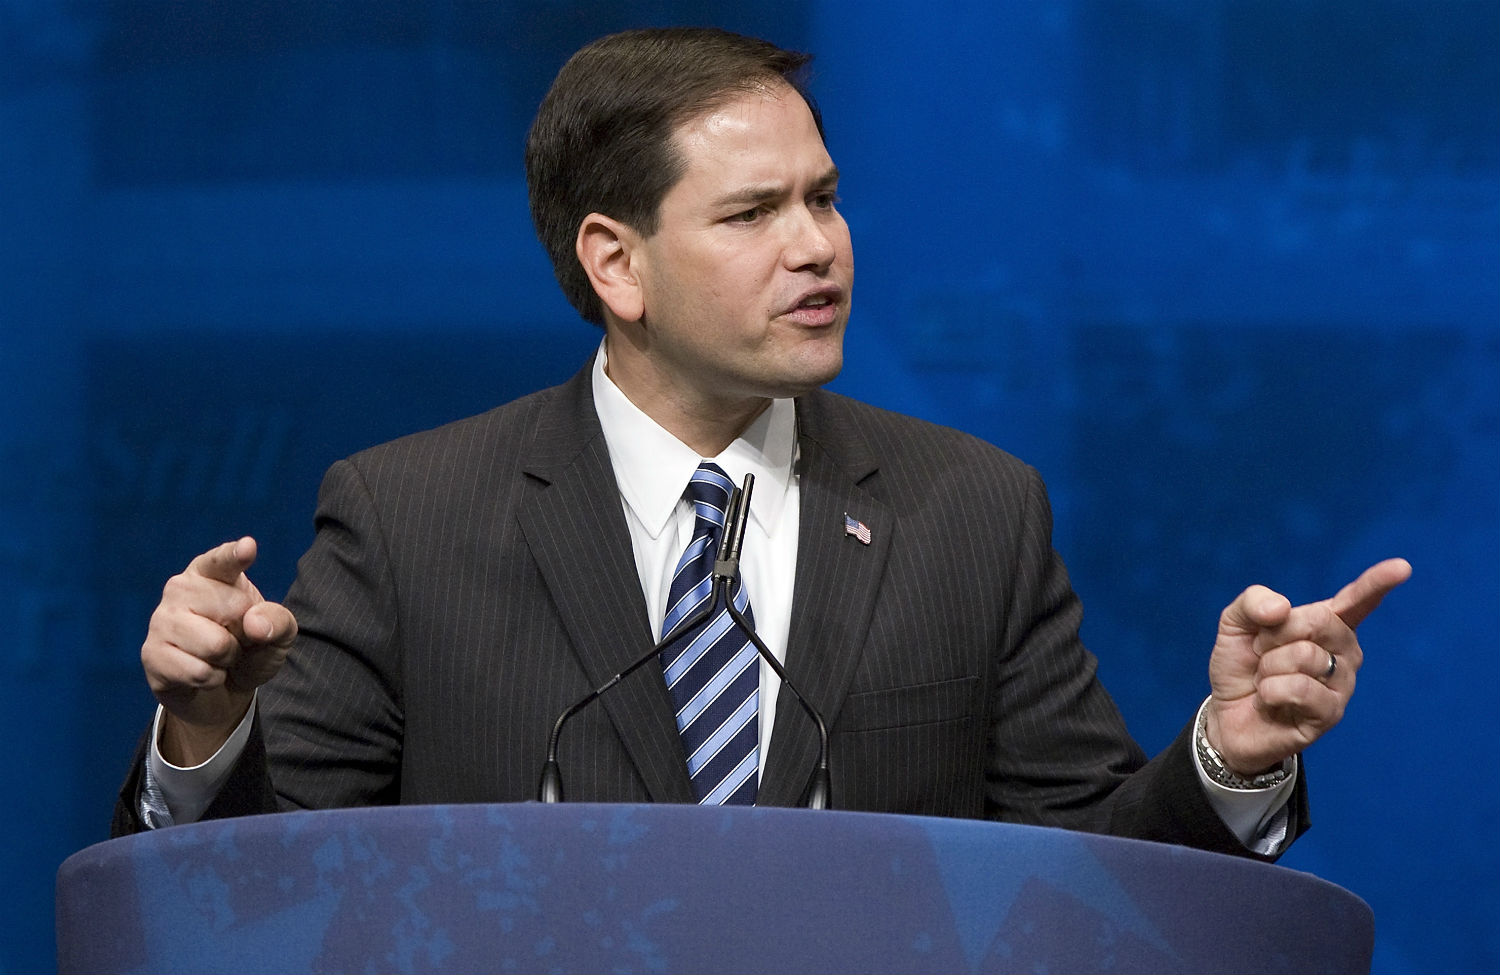 What’s the Difference Between Cubans and Haitians? Ask Marco Rubio